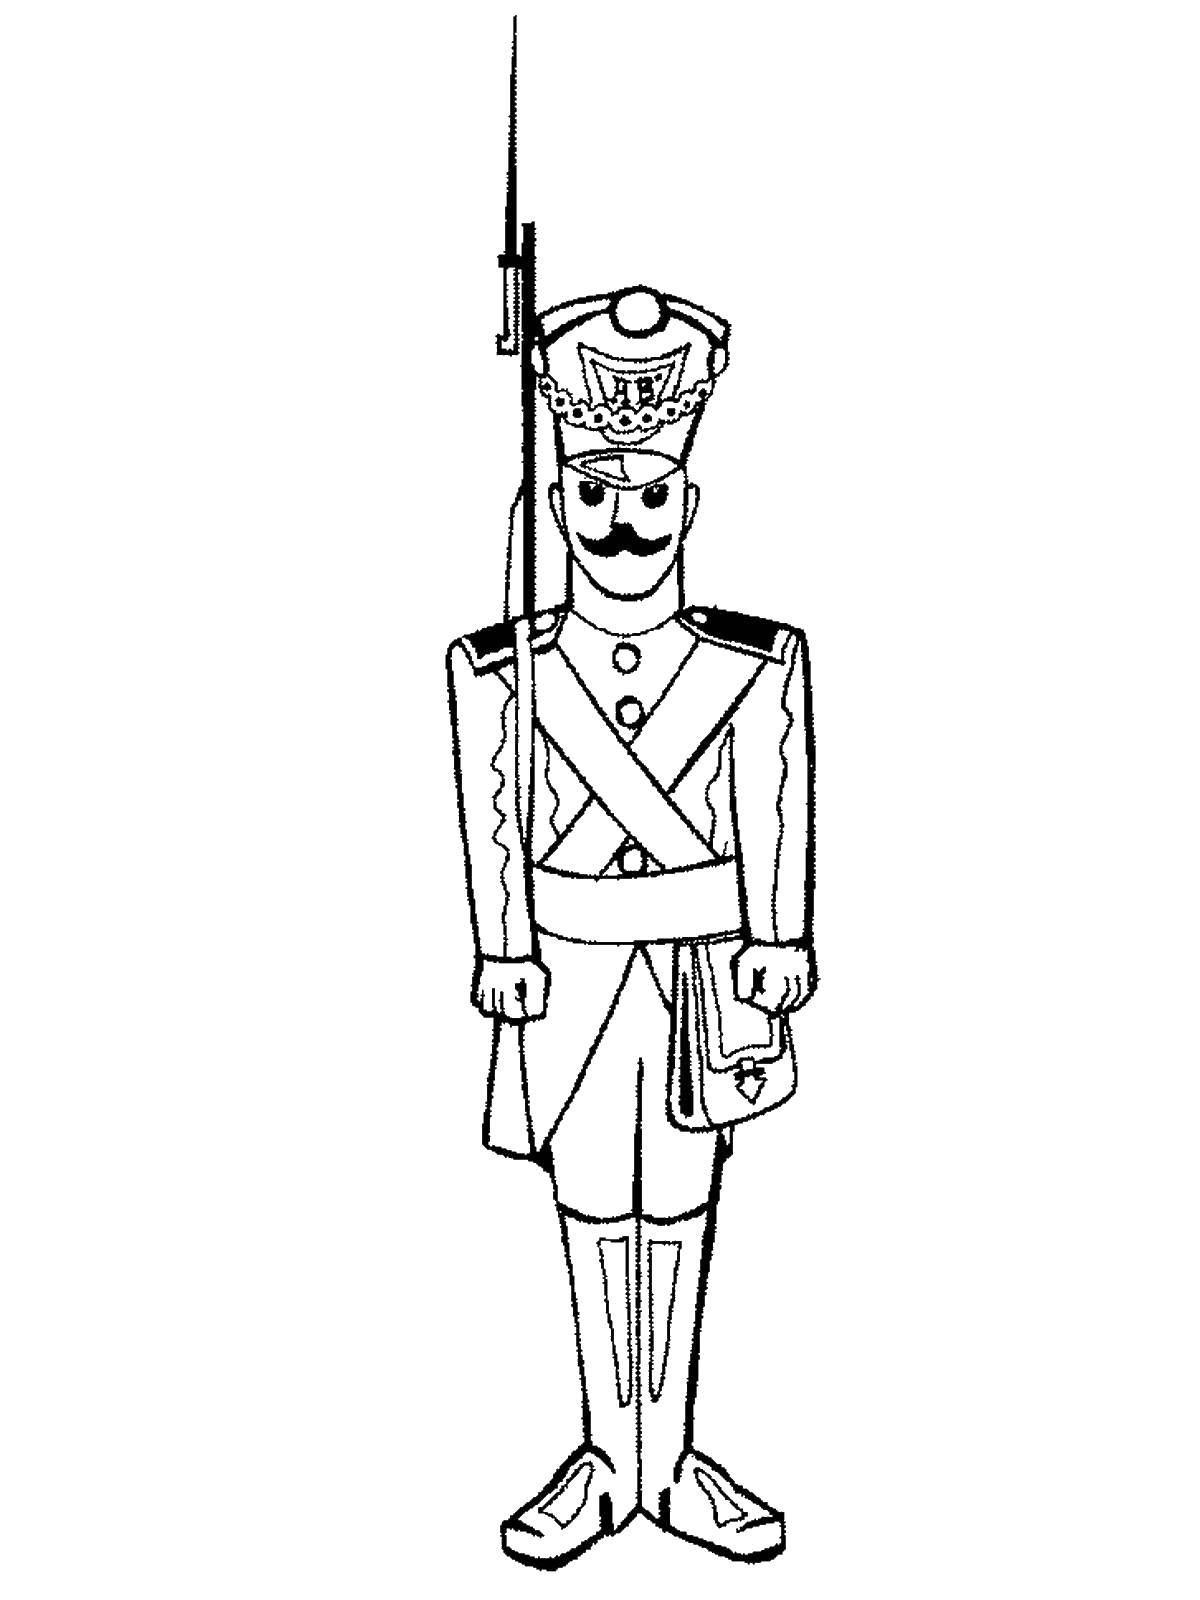 Coloring Hour guard. Category military coloring pages. Tags:  watch , guard, Royal.